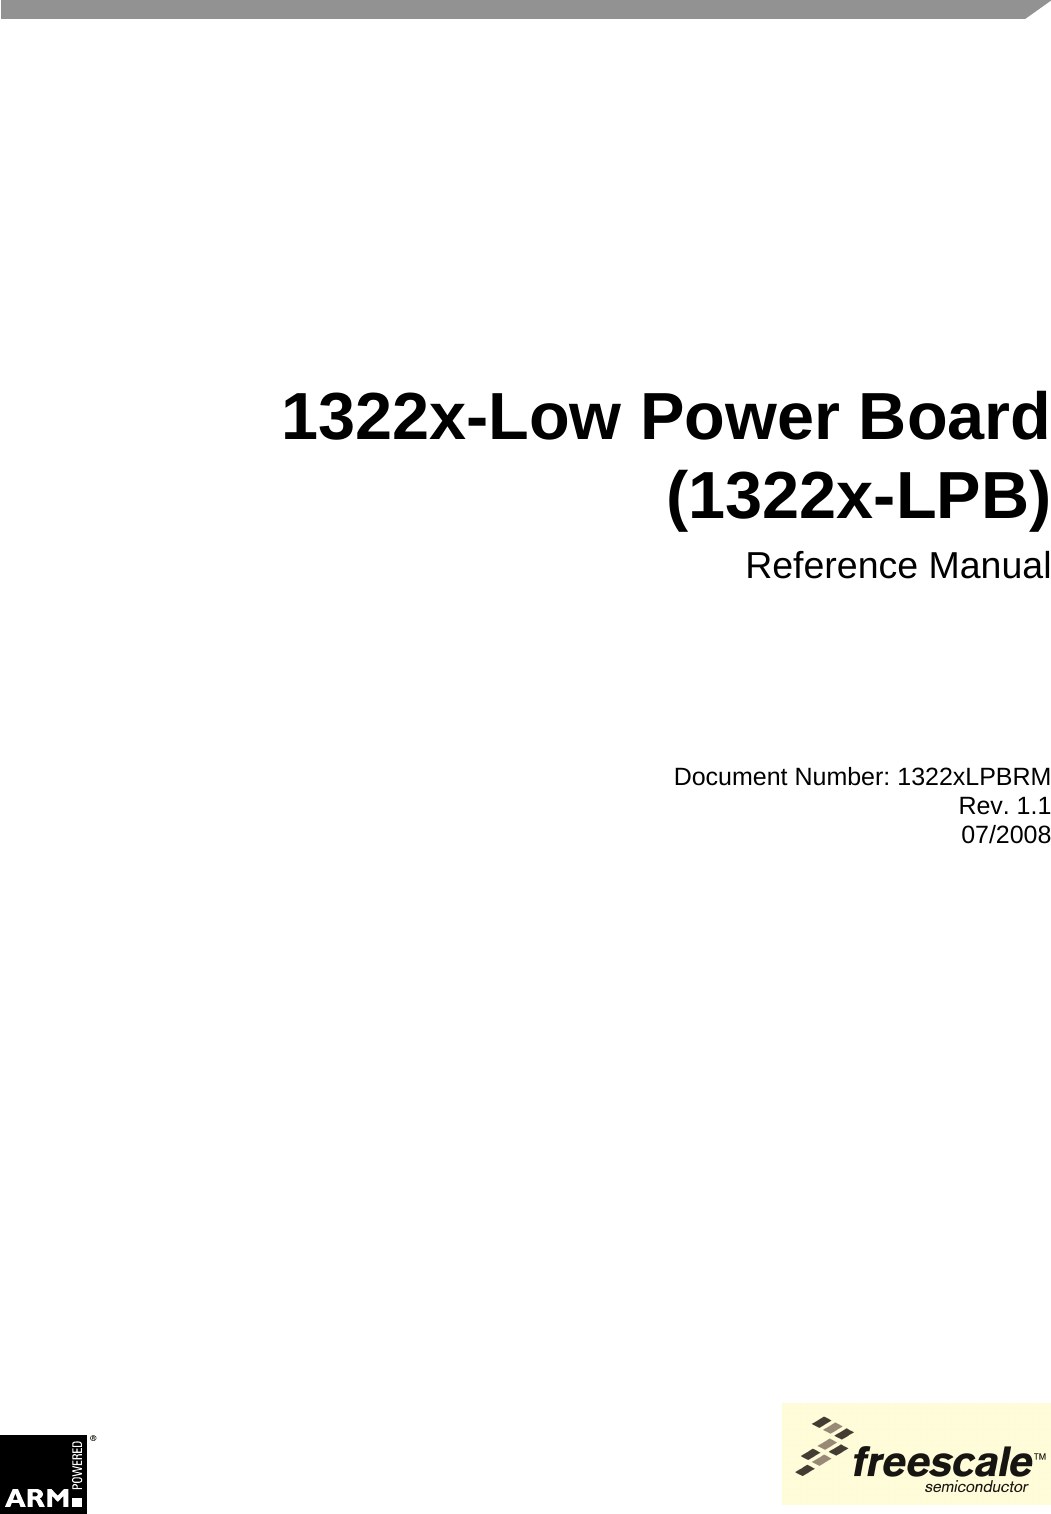 Document Number: 1322xLPBRMRev. 1.107/2008 1322x-Low Power Board(1322x-LPB)Reference Manual